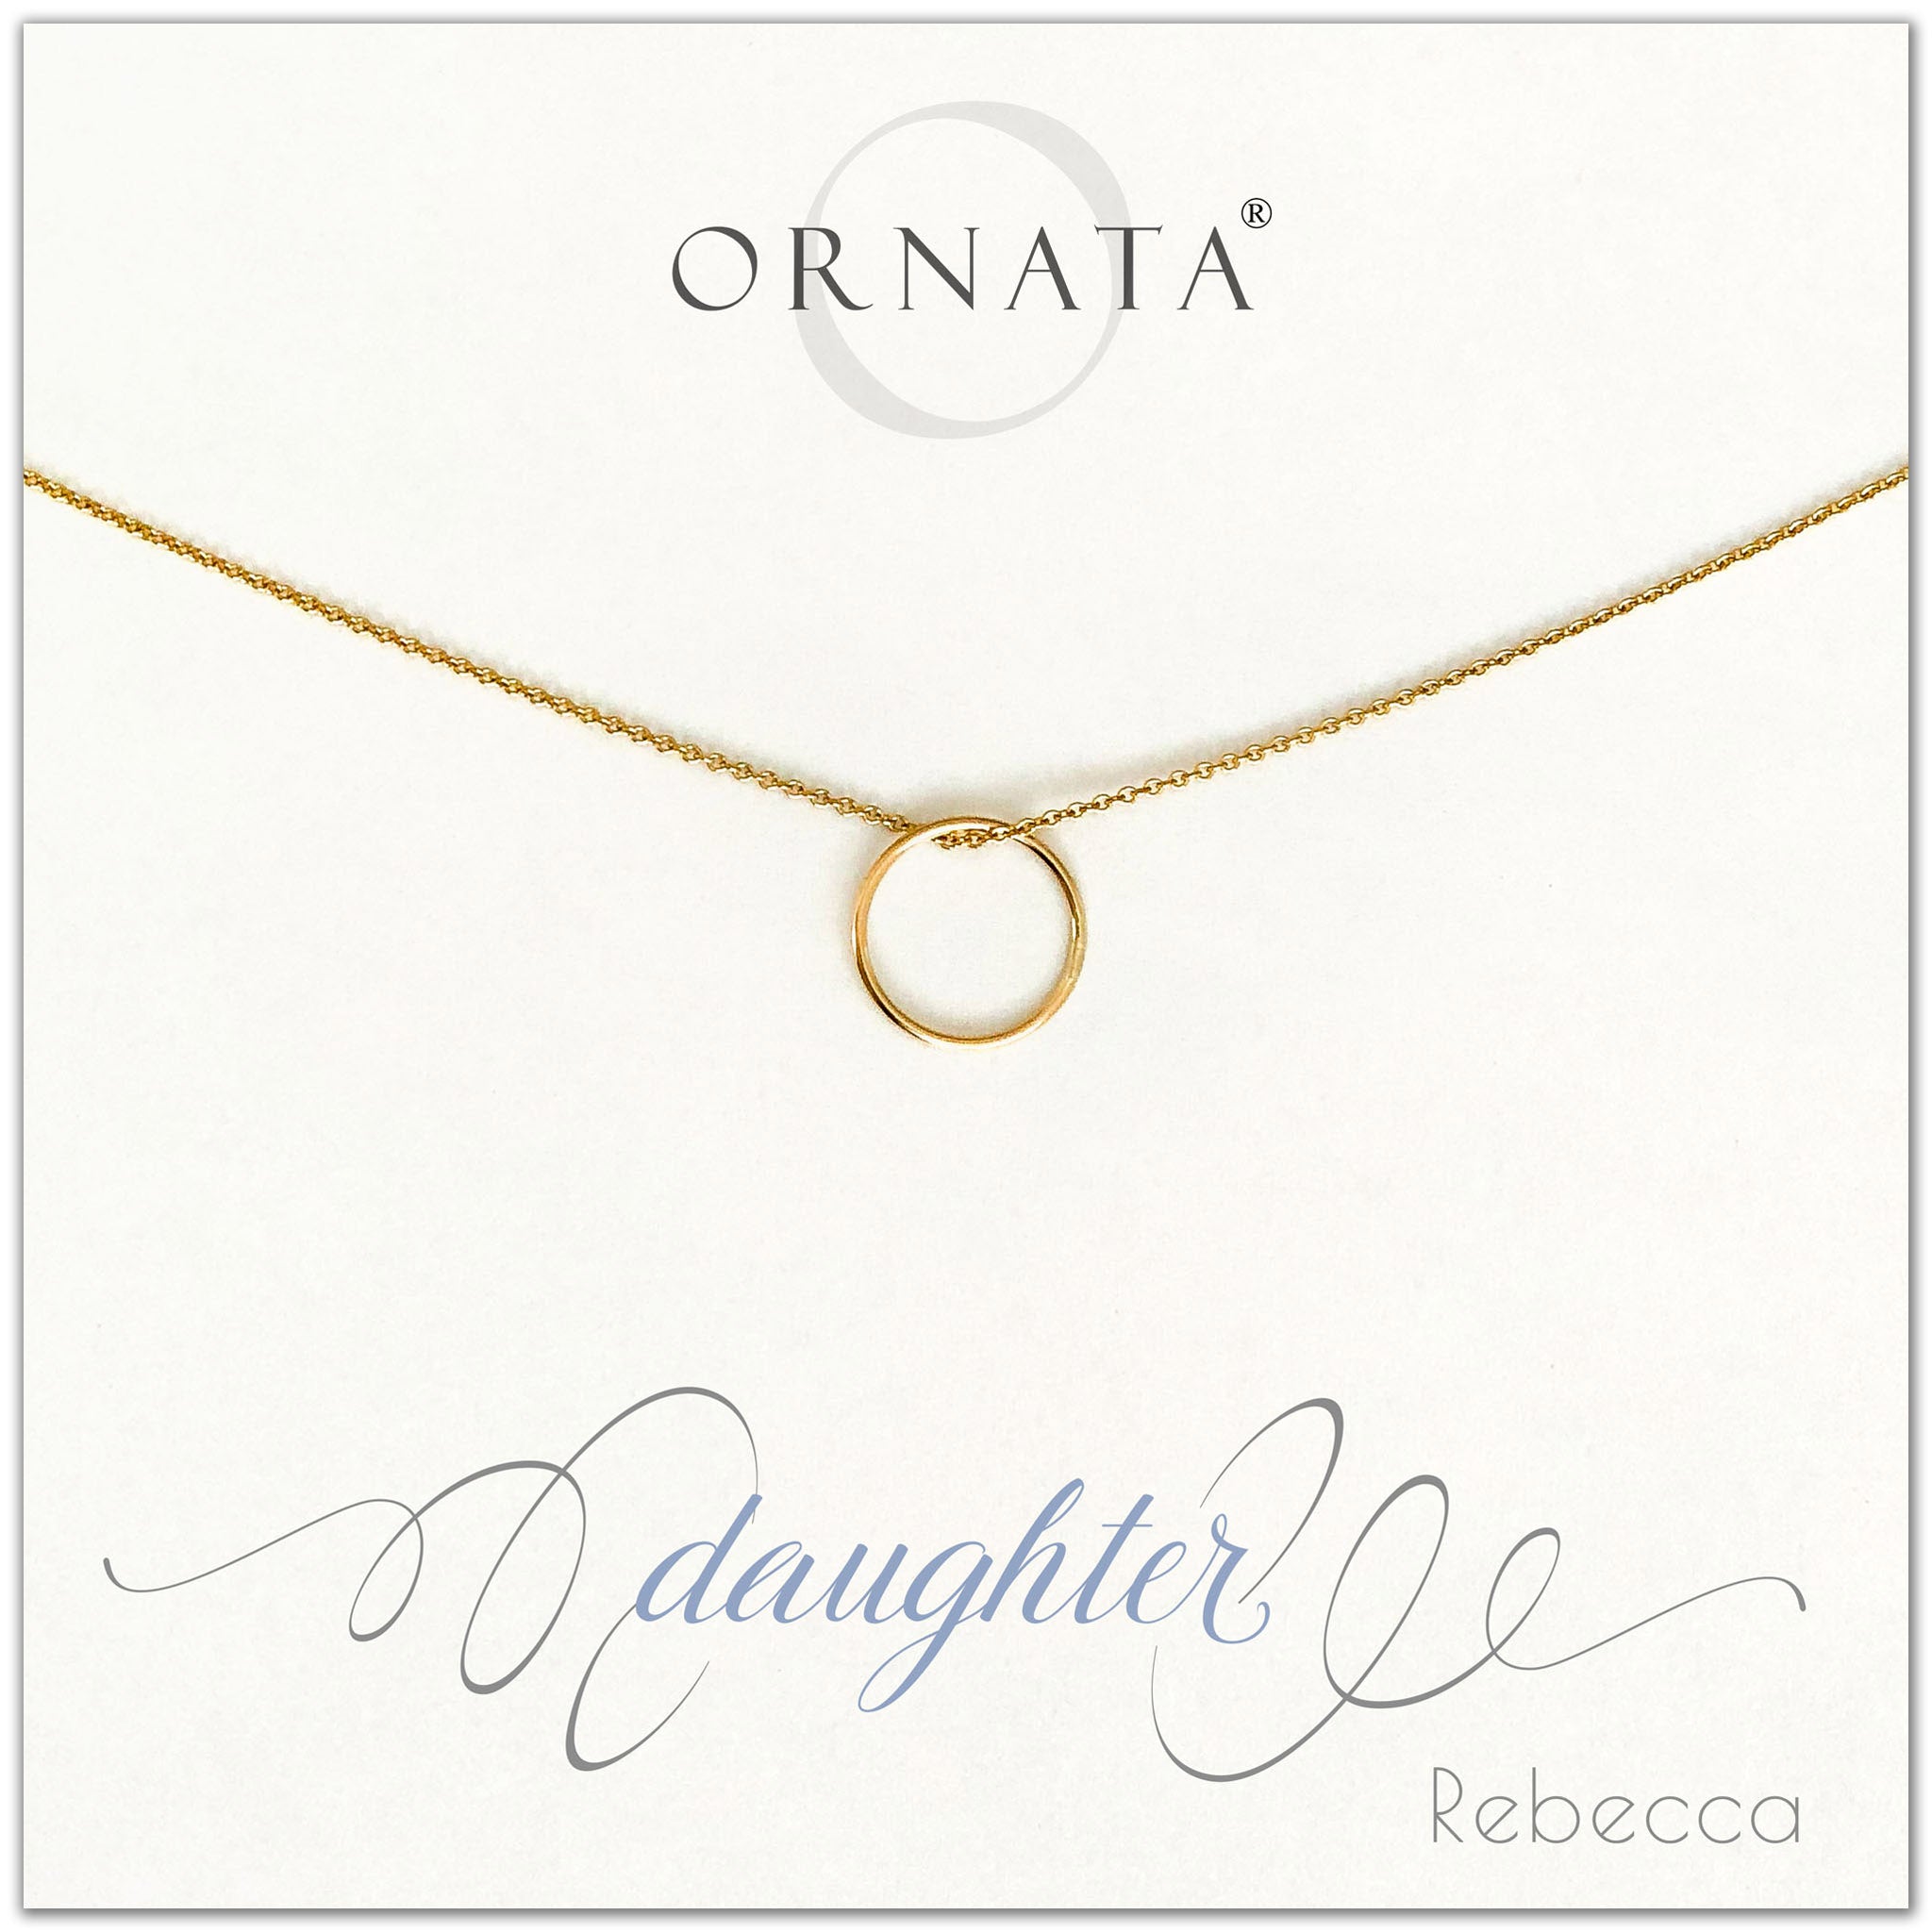 Daughter necklace - personalized gold necklaces. Our 14 karat gold filled custom jewelry is a perfect gift for daughters from mothers or fathers. Also a good gift for Mother’s Day. Part of our Generations Jewelry collection. 